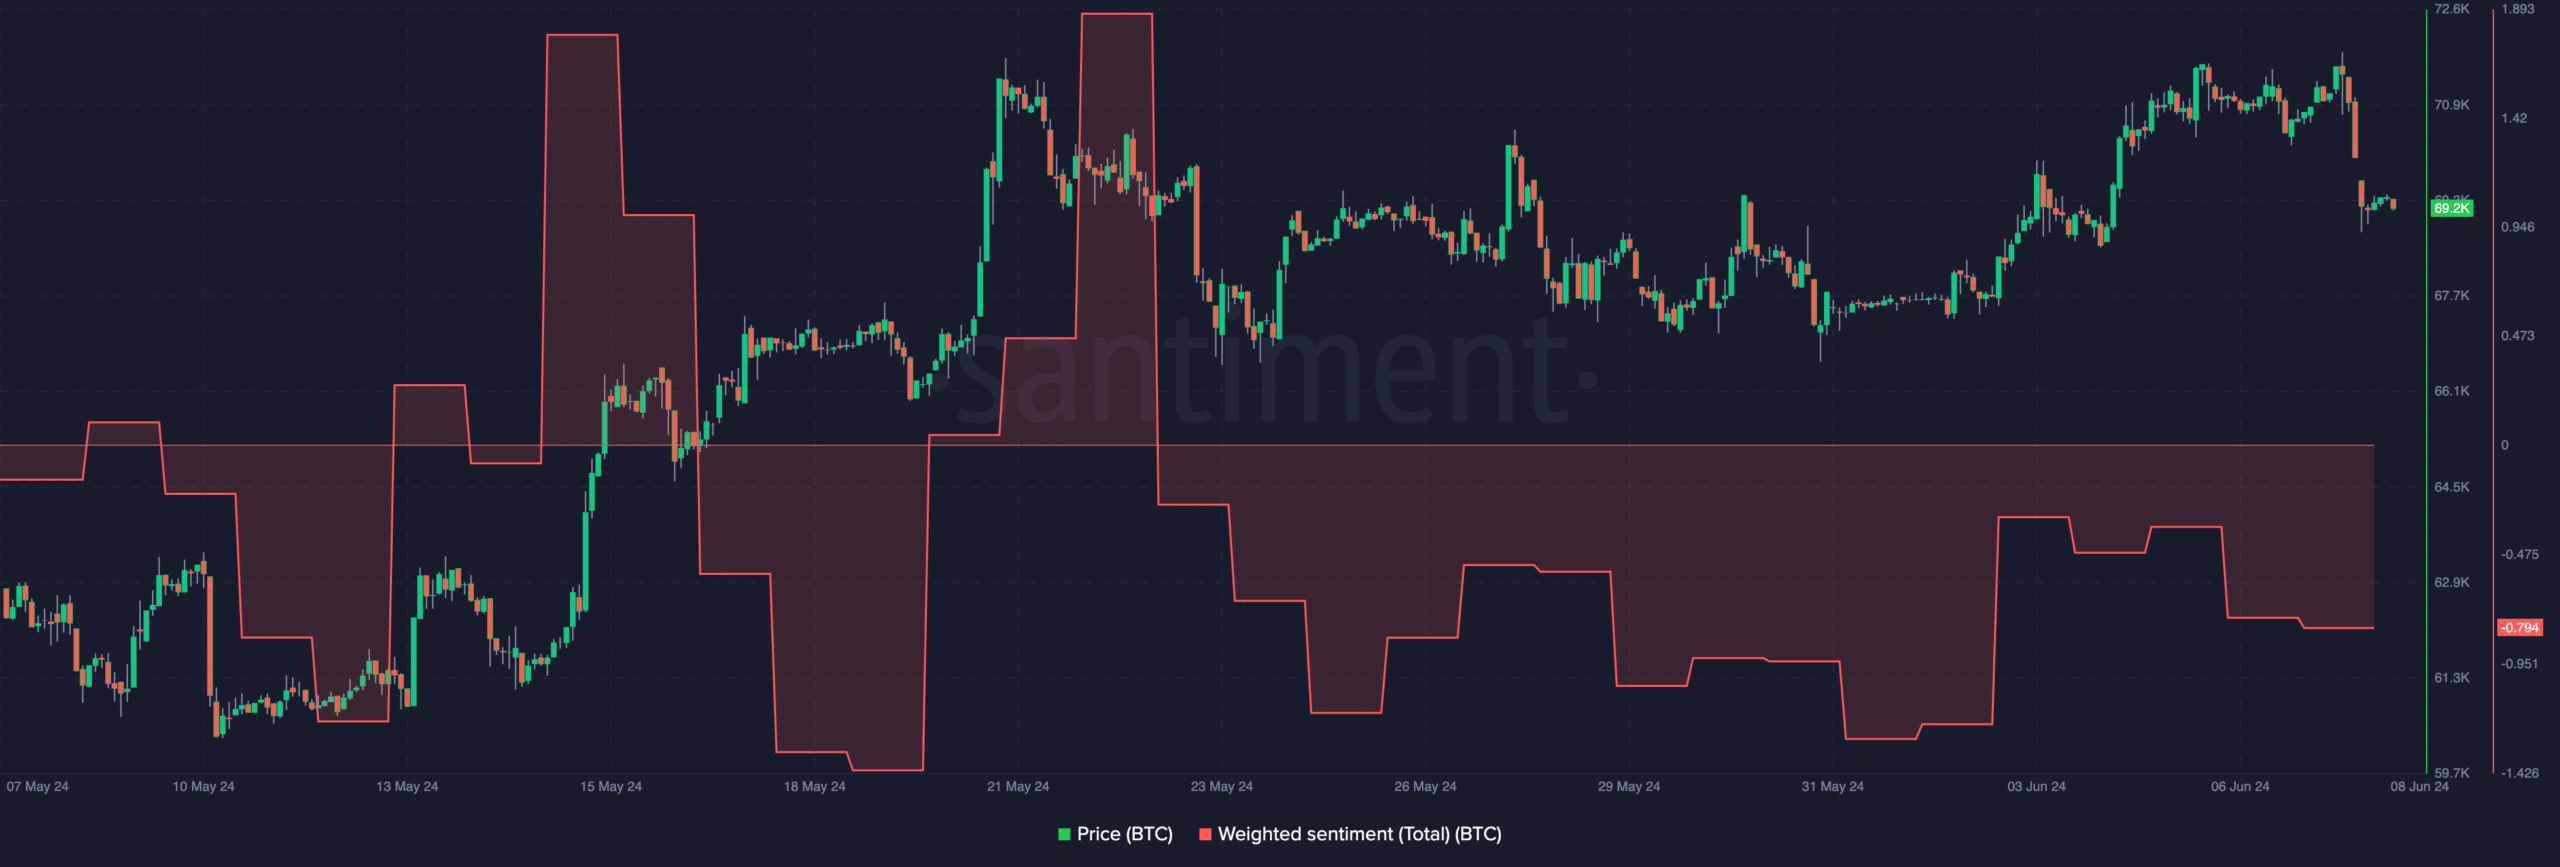 Bitcoin sentiment and price action